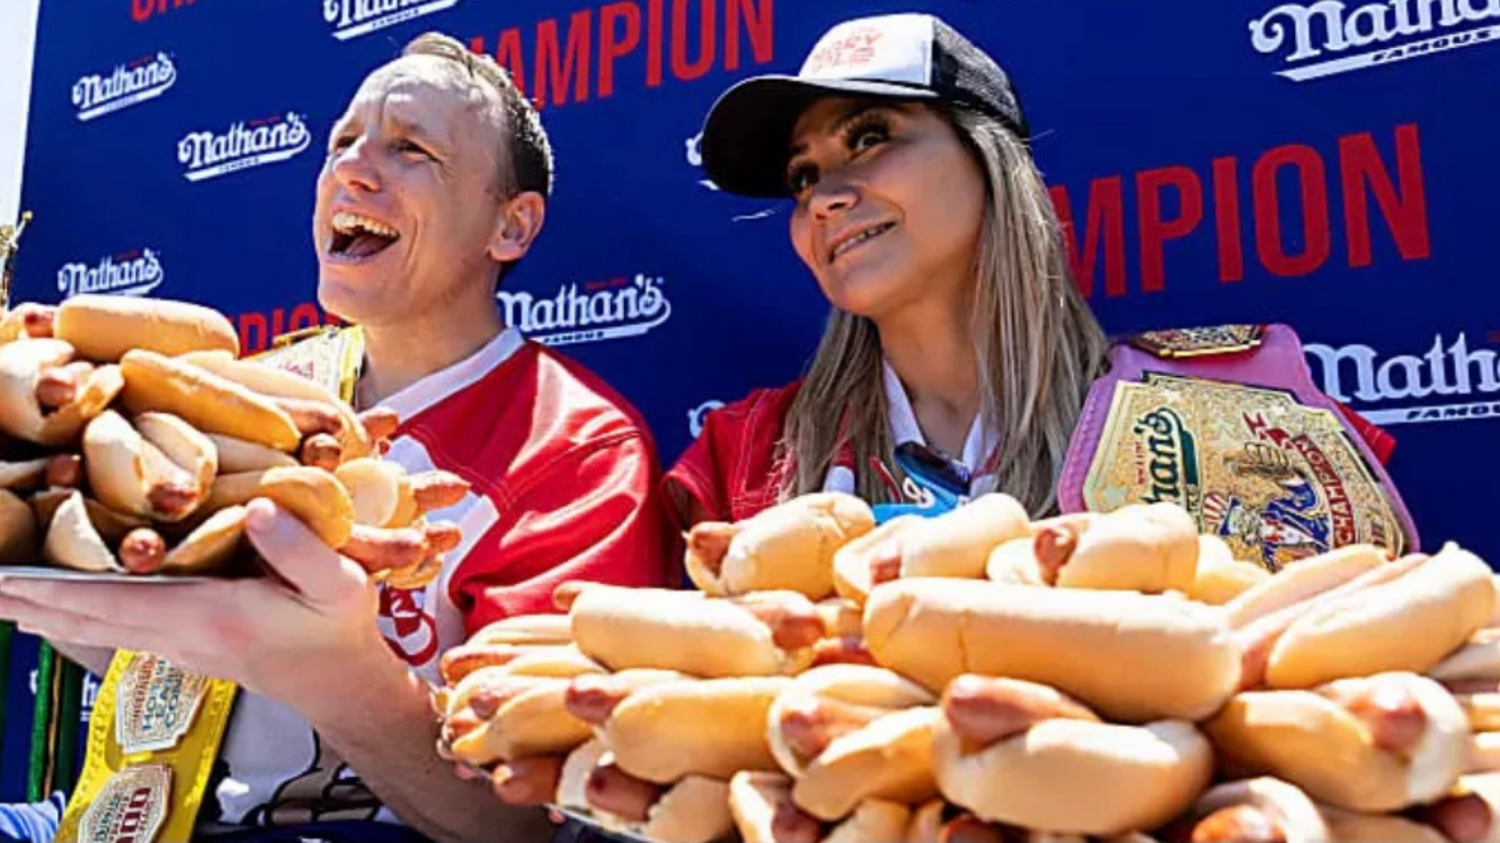 Joey Chestnut remains hot dog eating champ. Here’s how many calories he